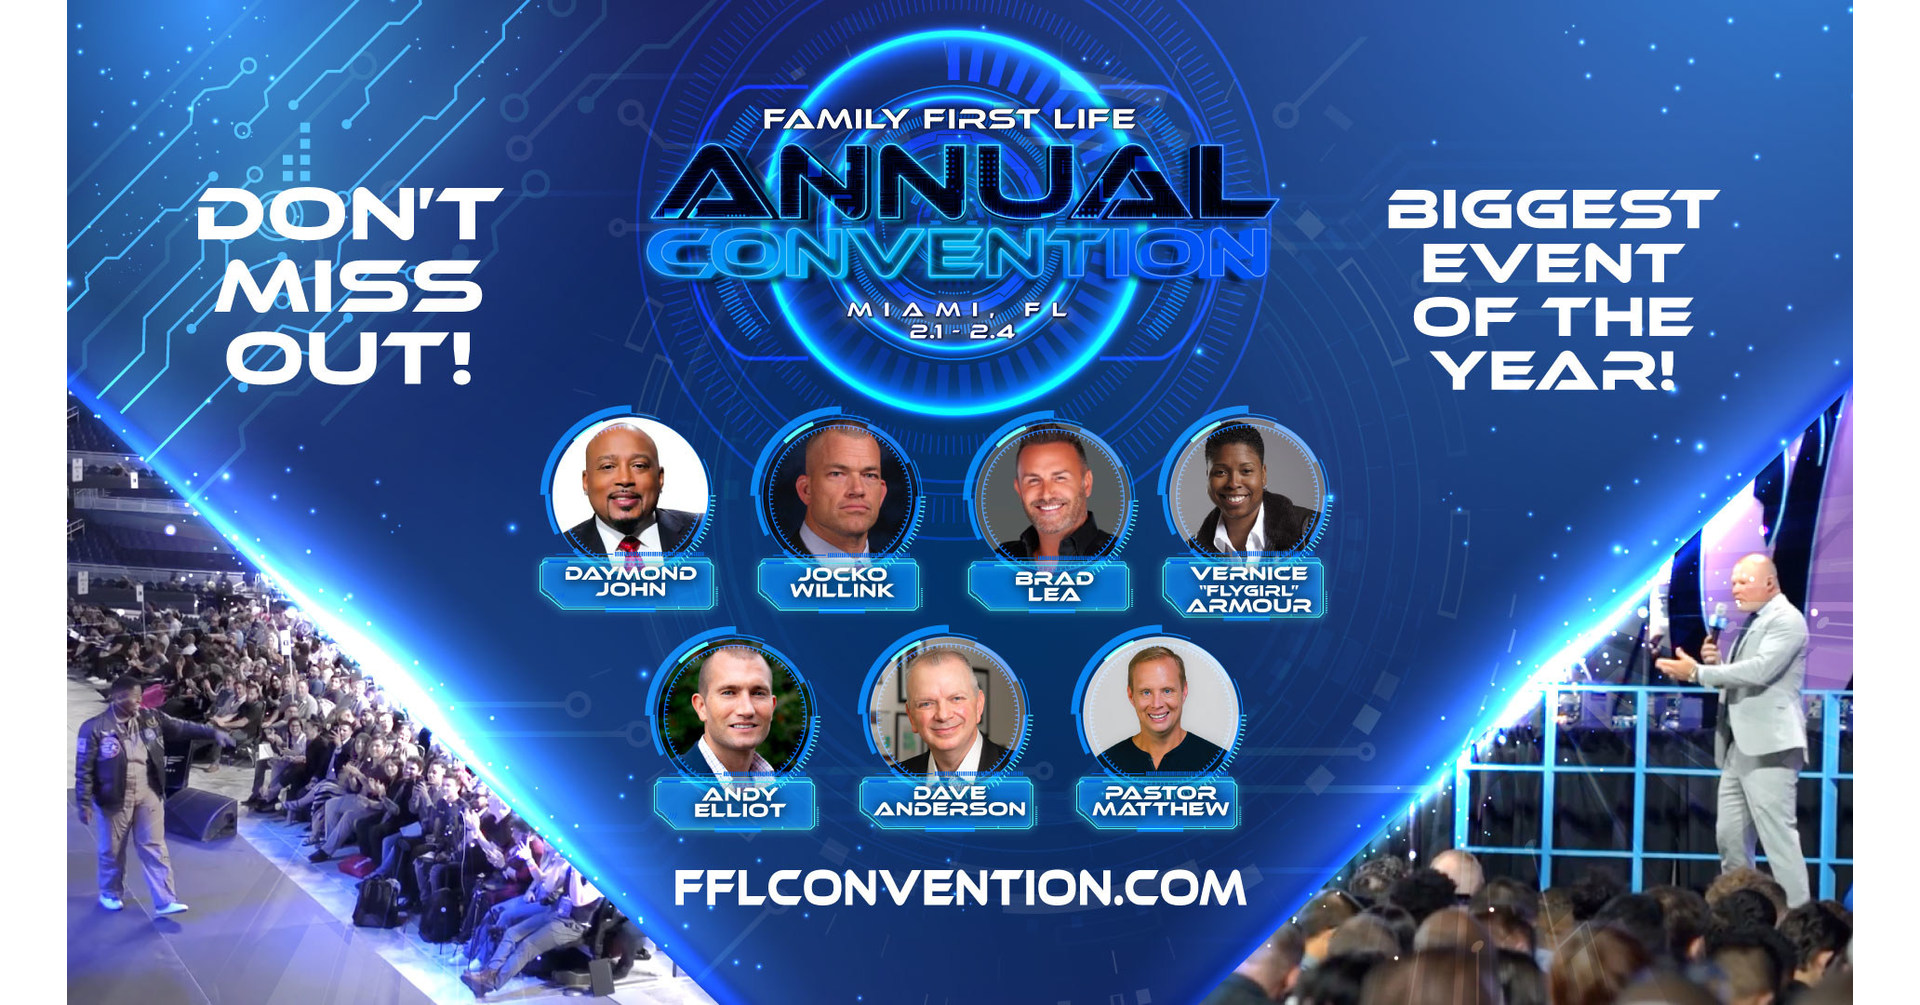 Family First Life Announces Annual Convention with StarStudded Guest